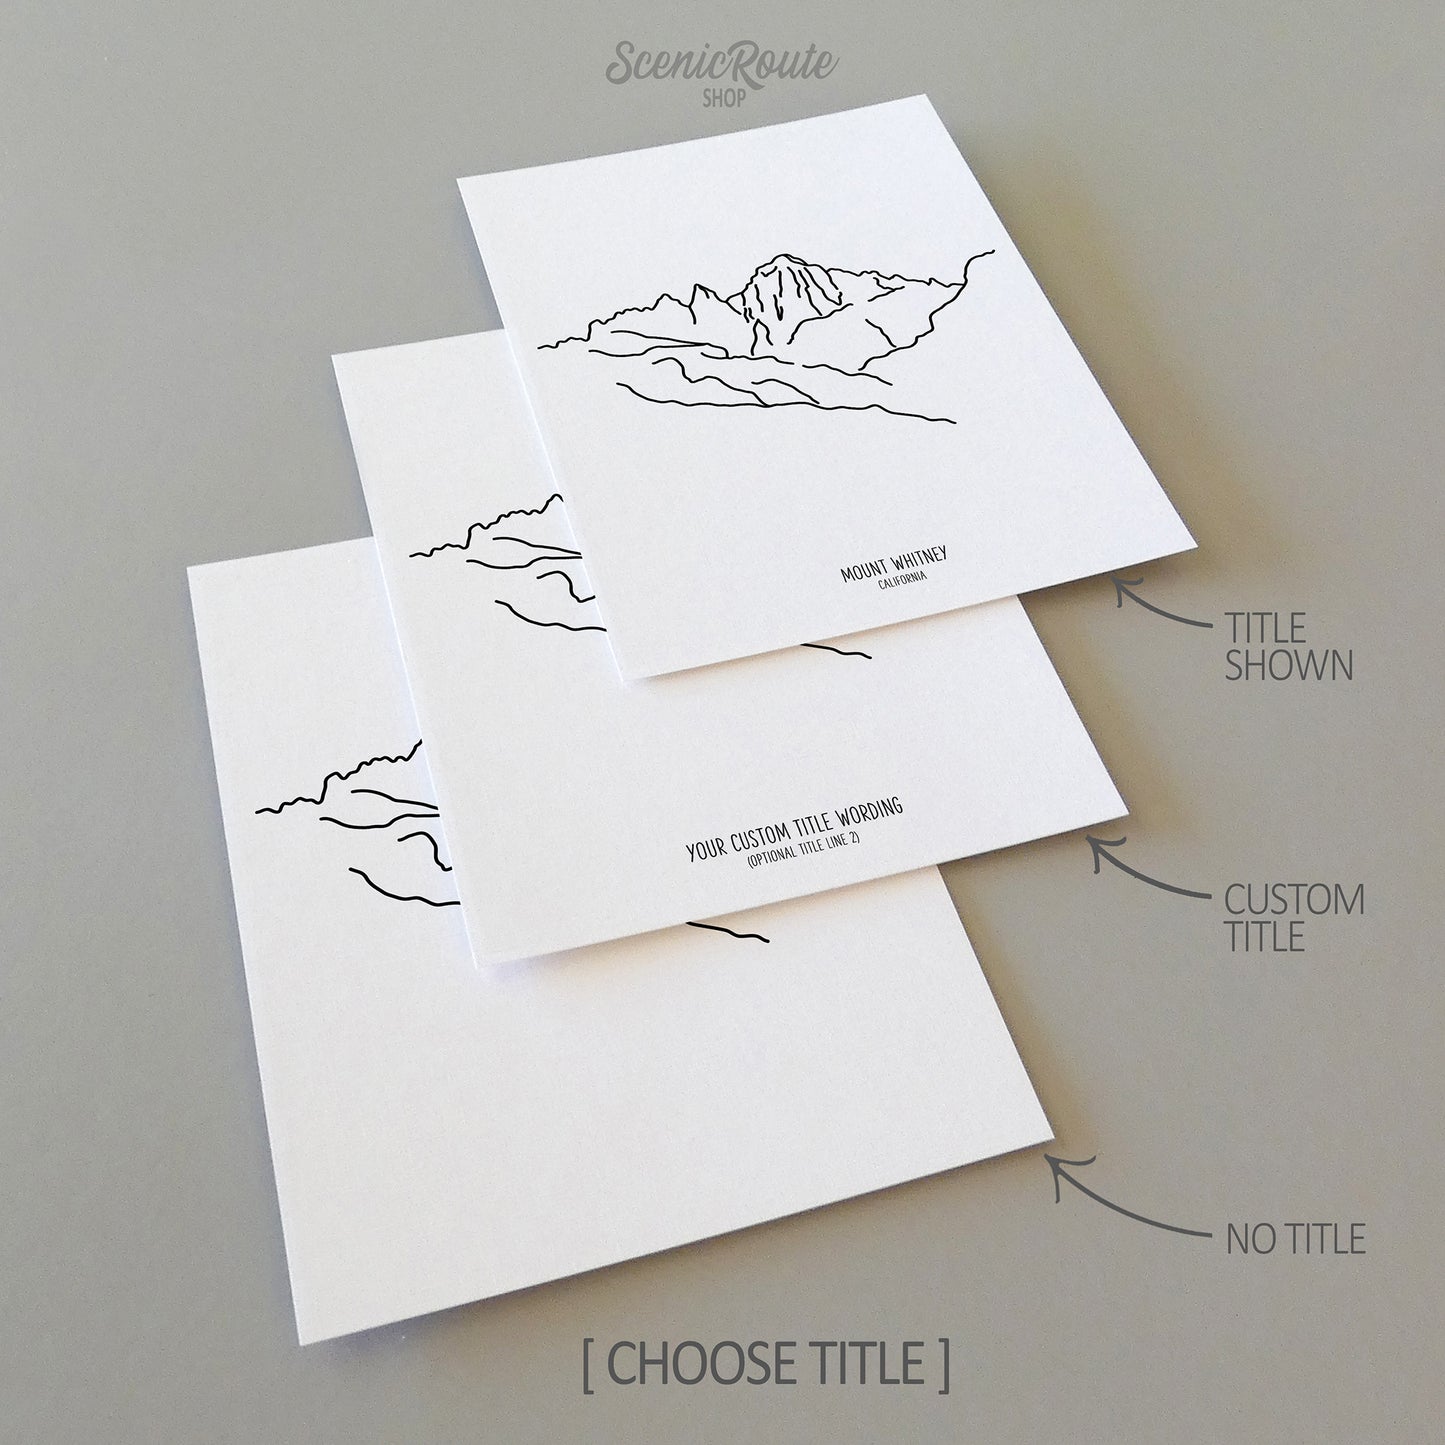 Three line art drawings of Mount Whitney in California on white linen paper with a gray background.  The pieces are shown with title options that can be chosen and personalized.